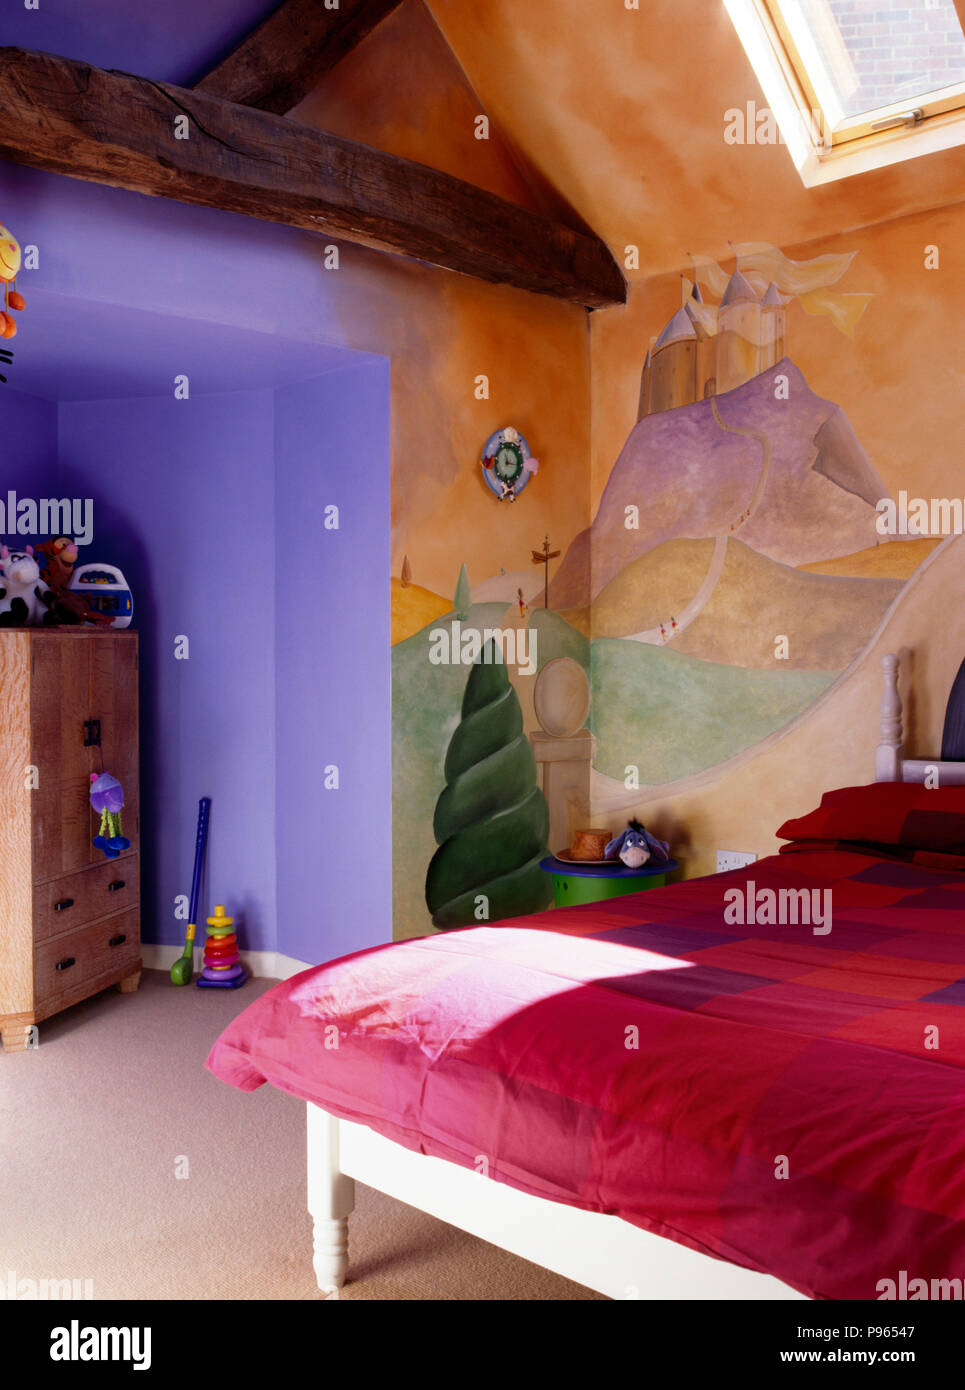 Pink duvet on bed in a children's nineties bedroom with a mural painted on the walls Stock Photo